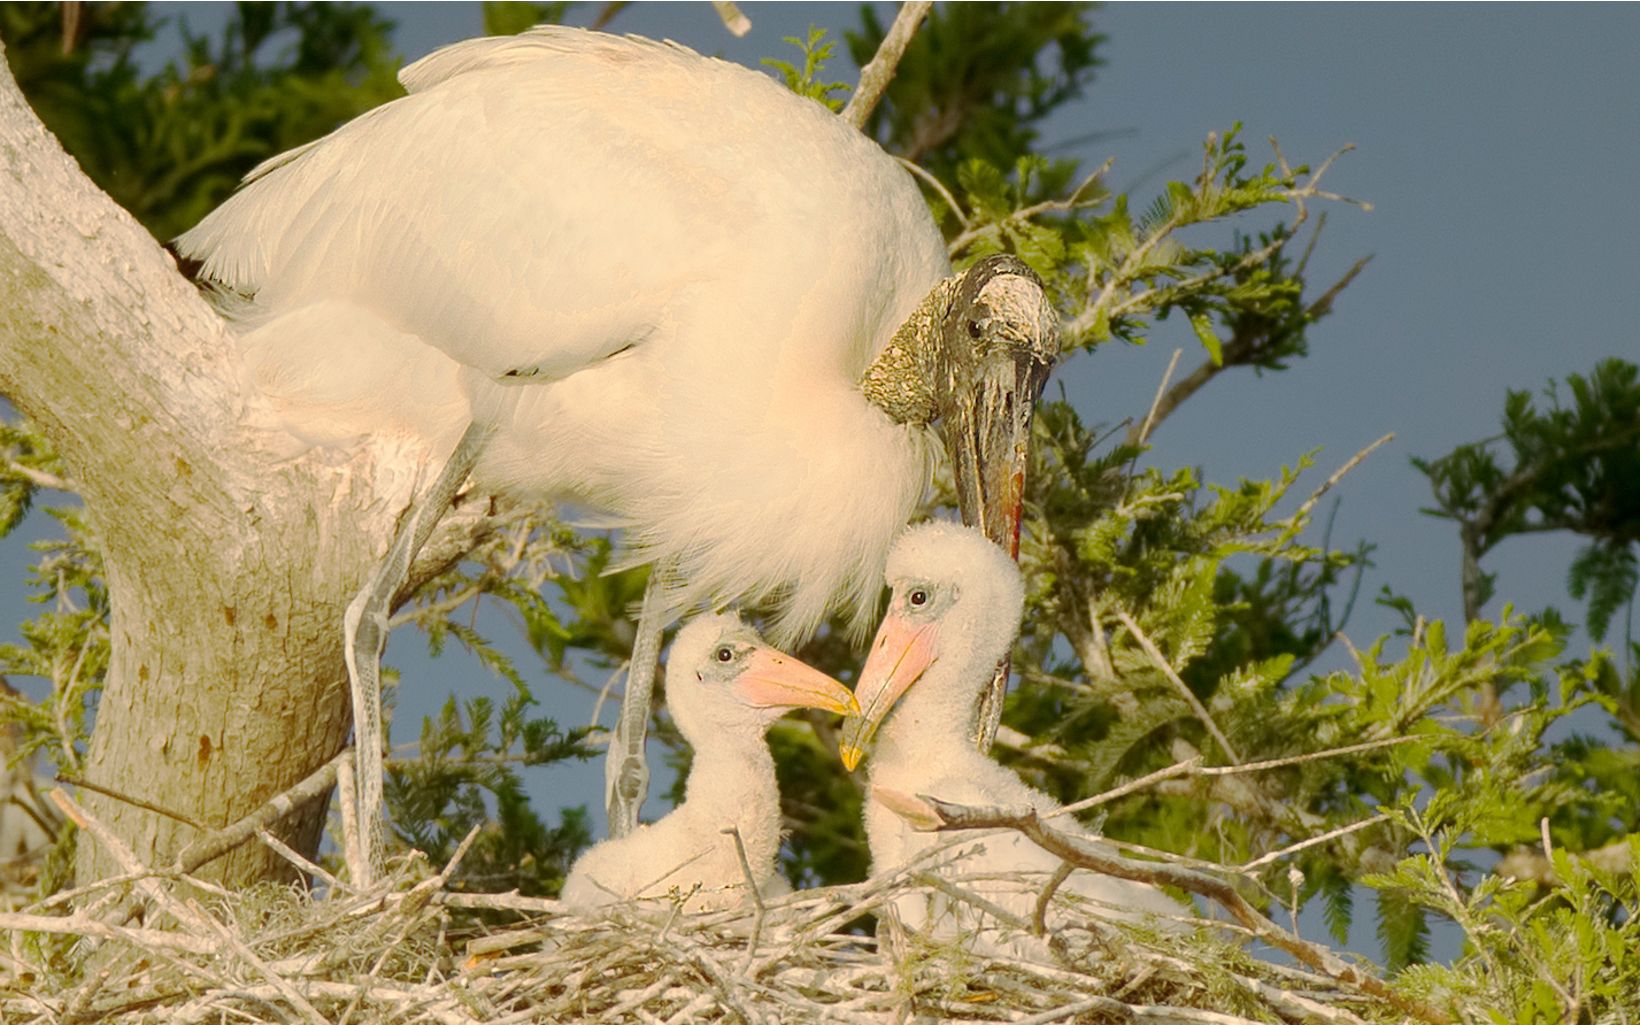 Wood stork parent with two chicks nesting at Disney Wilderness Preserve.